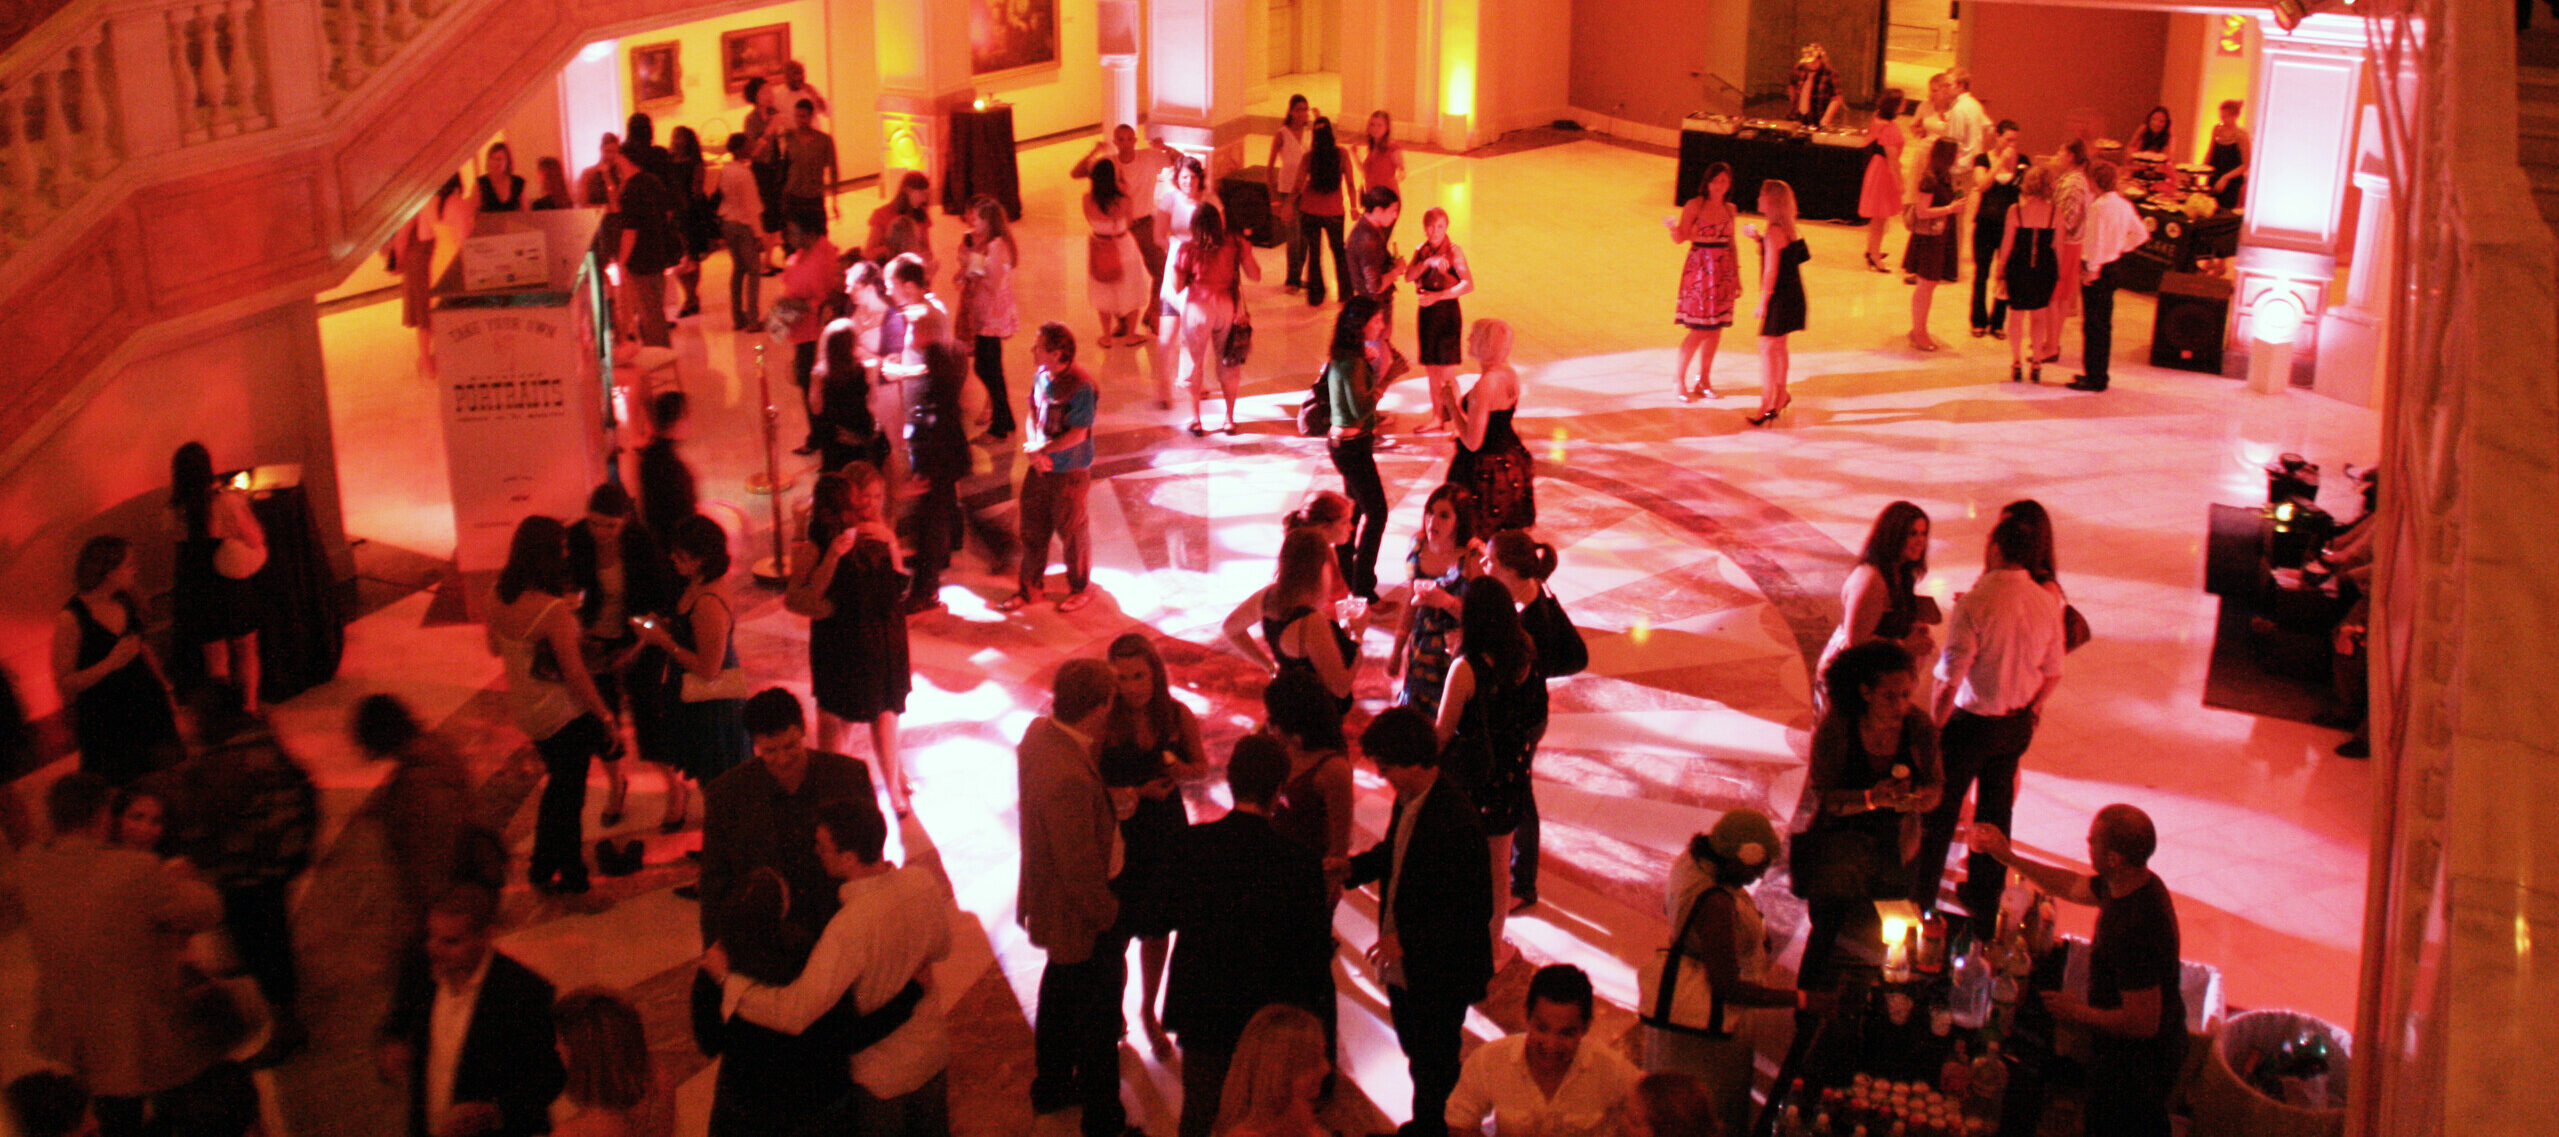 A grand entrance hall lit with an amber glow is filled with attendees during an evening event at the museum.